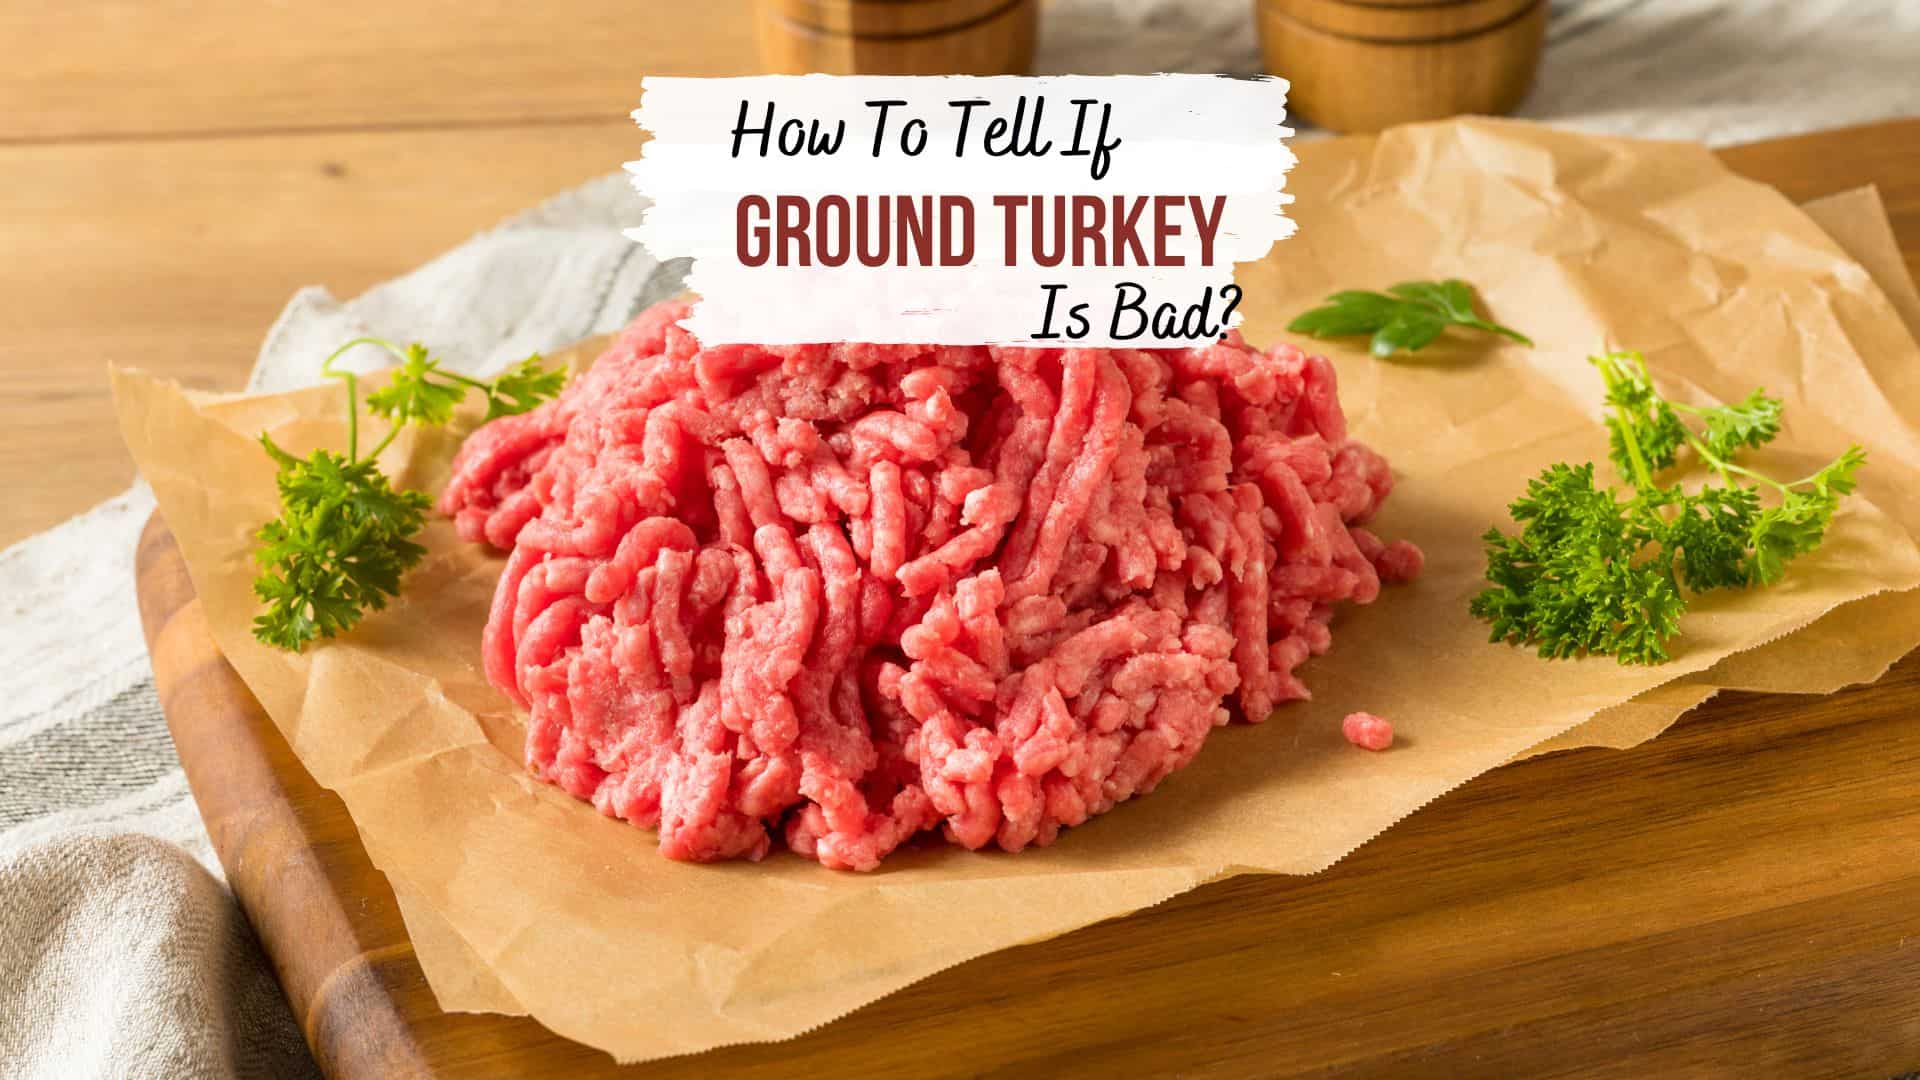 How to Tell If Ground Turkey Has Gone Bad